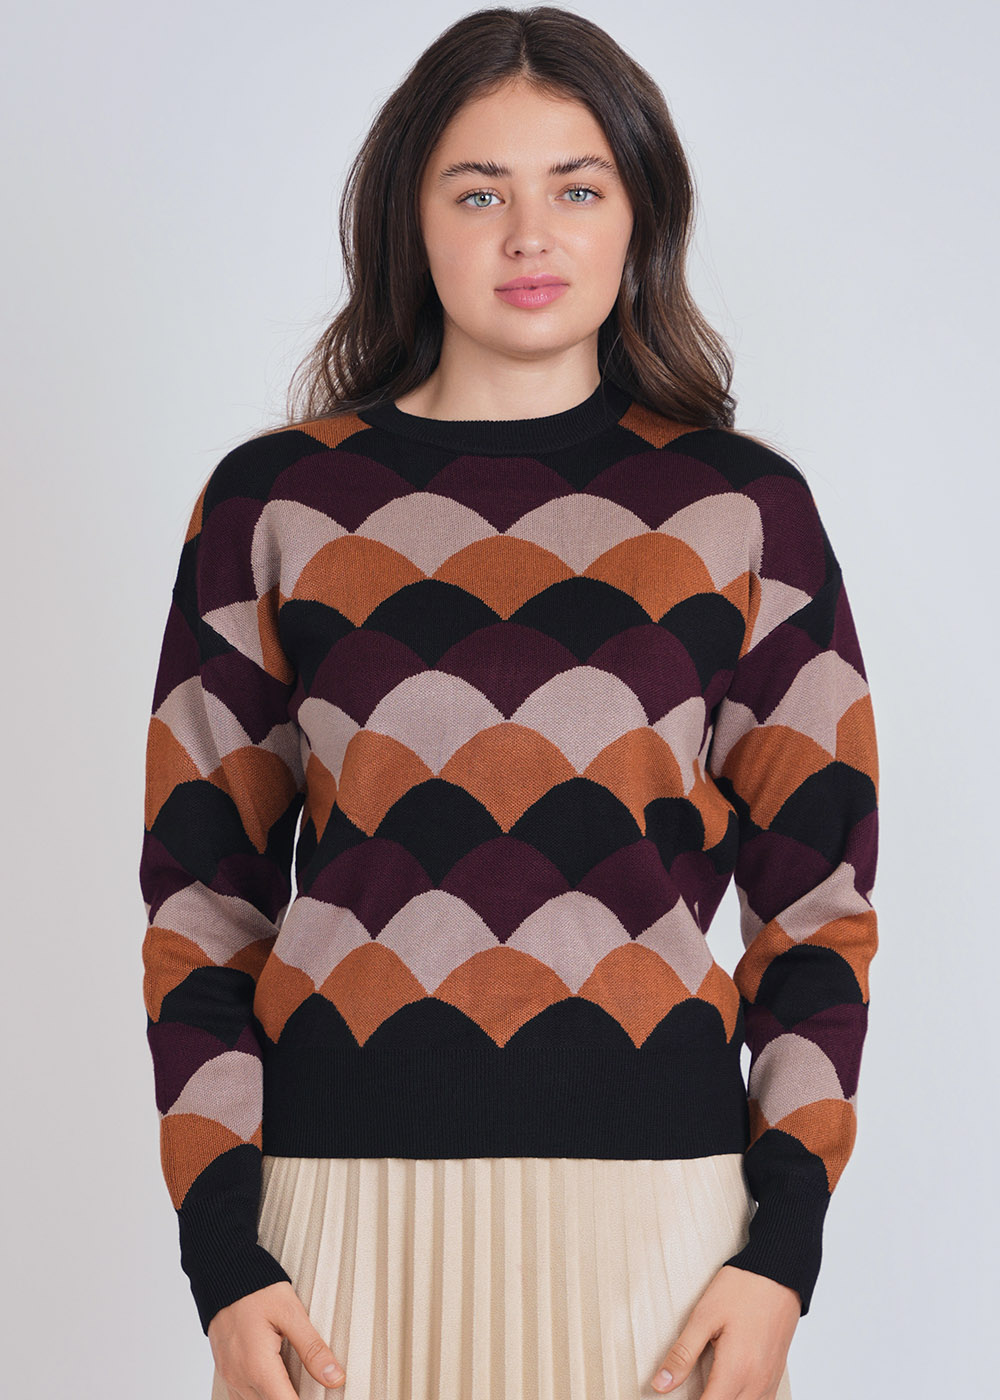 Multi-Hued Sweater with a Hint of Mosaic Design